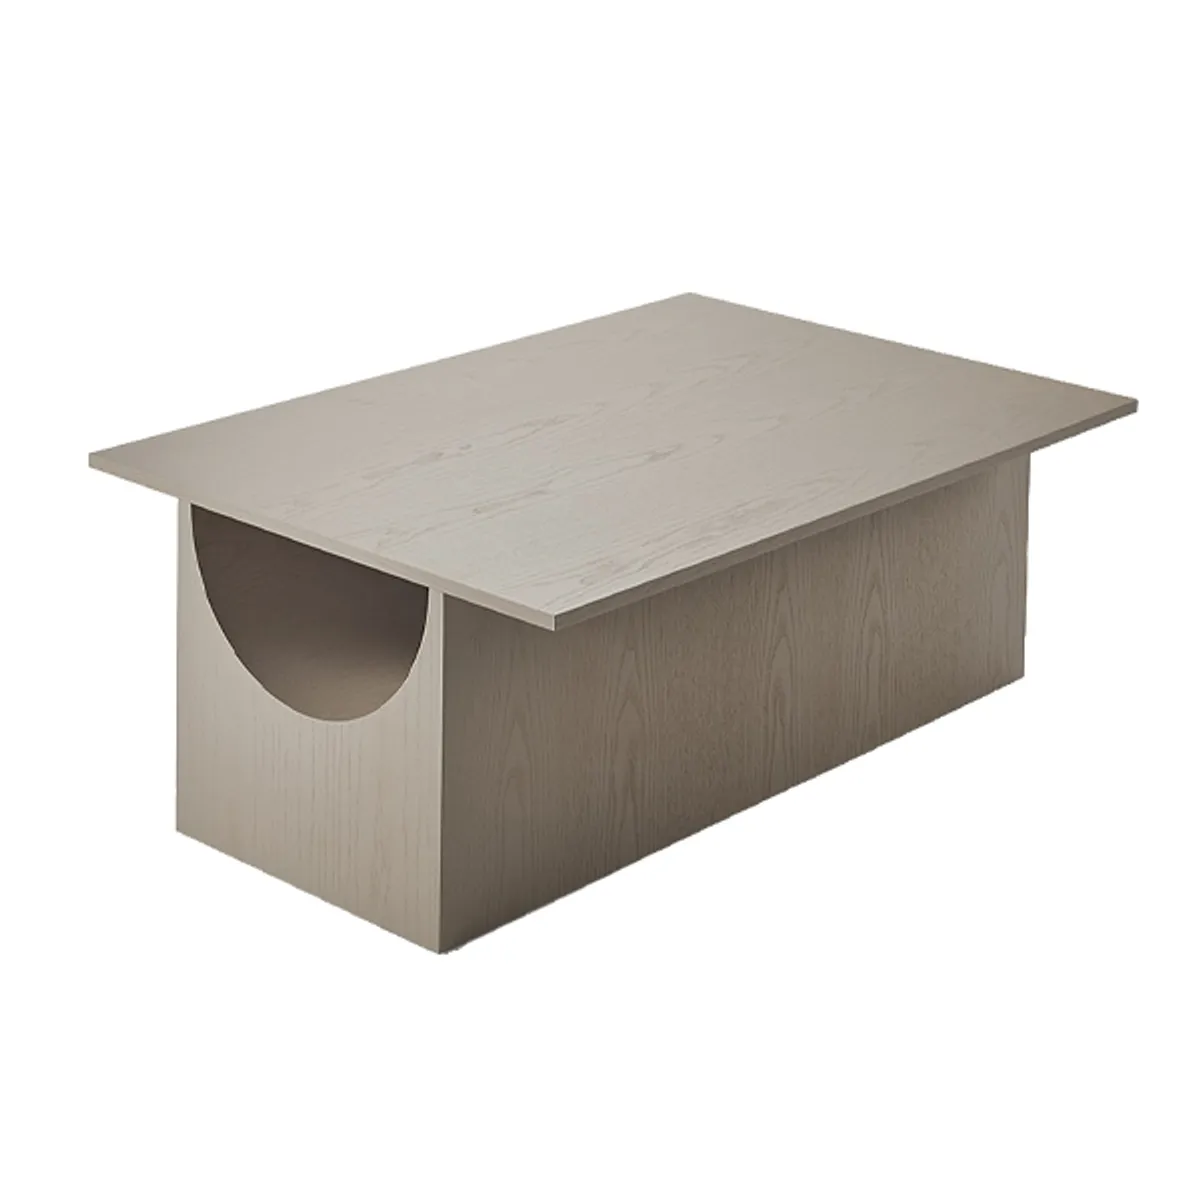 Vestige square coffee table Inside Out Contracts5